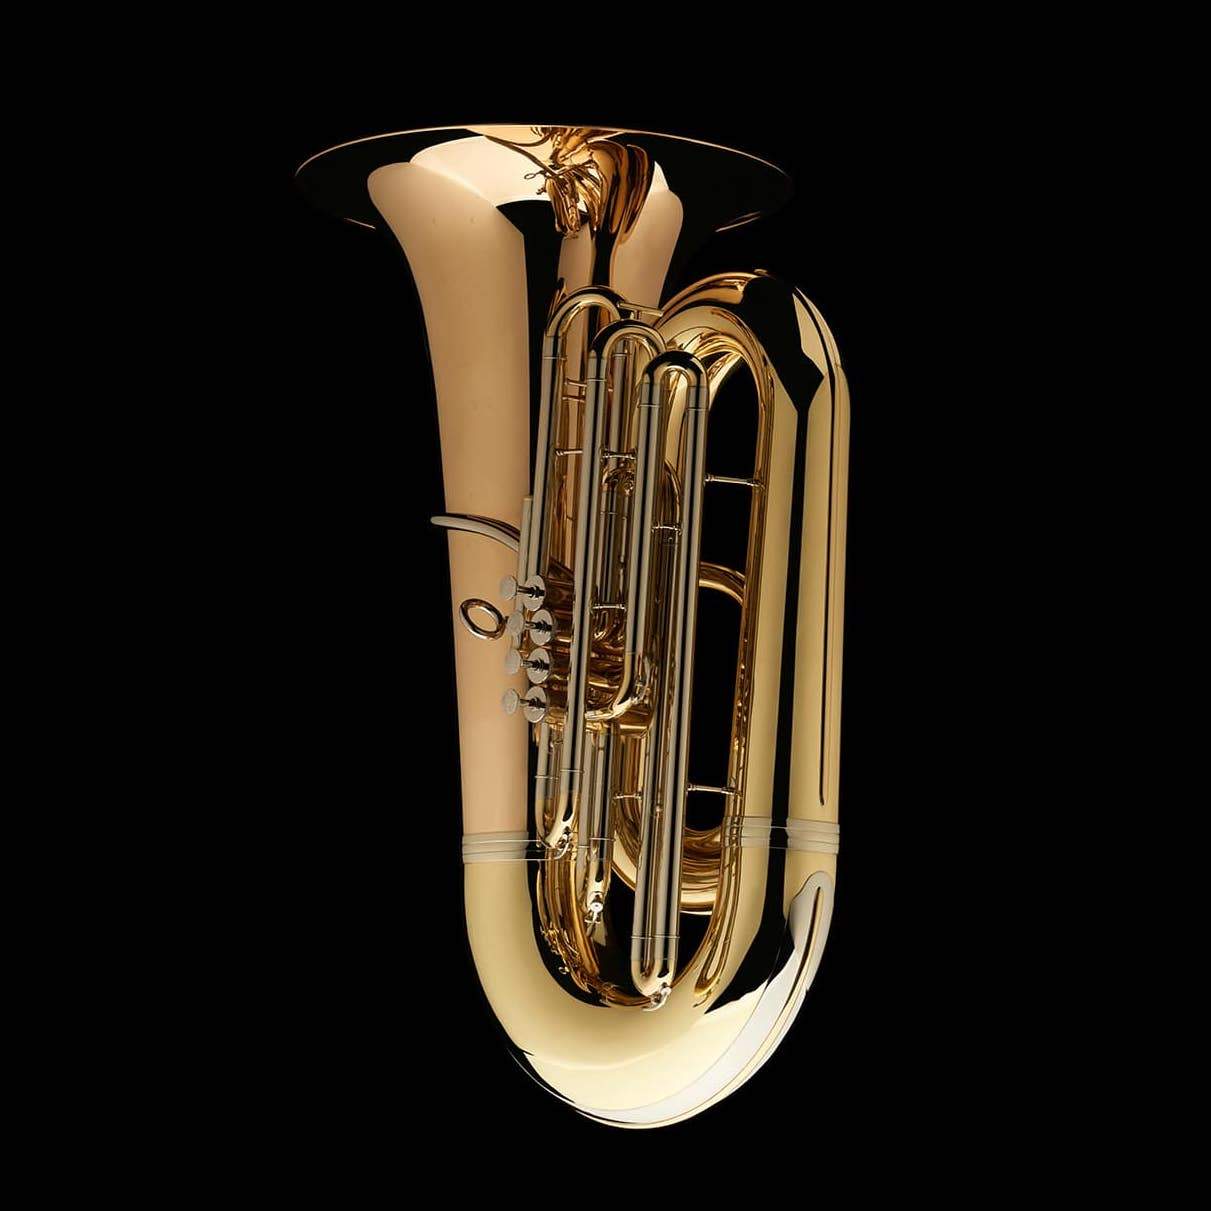 An image of the front of a BBb 6/4 Front-Piston Tuba "Grand" from Wessex Tubas